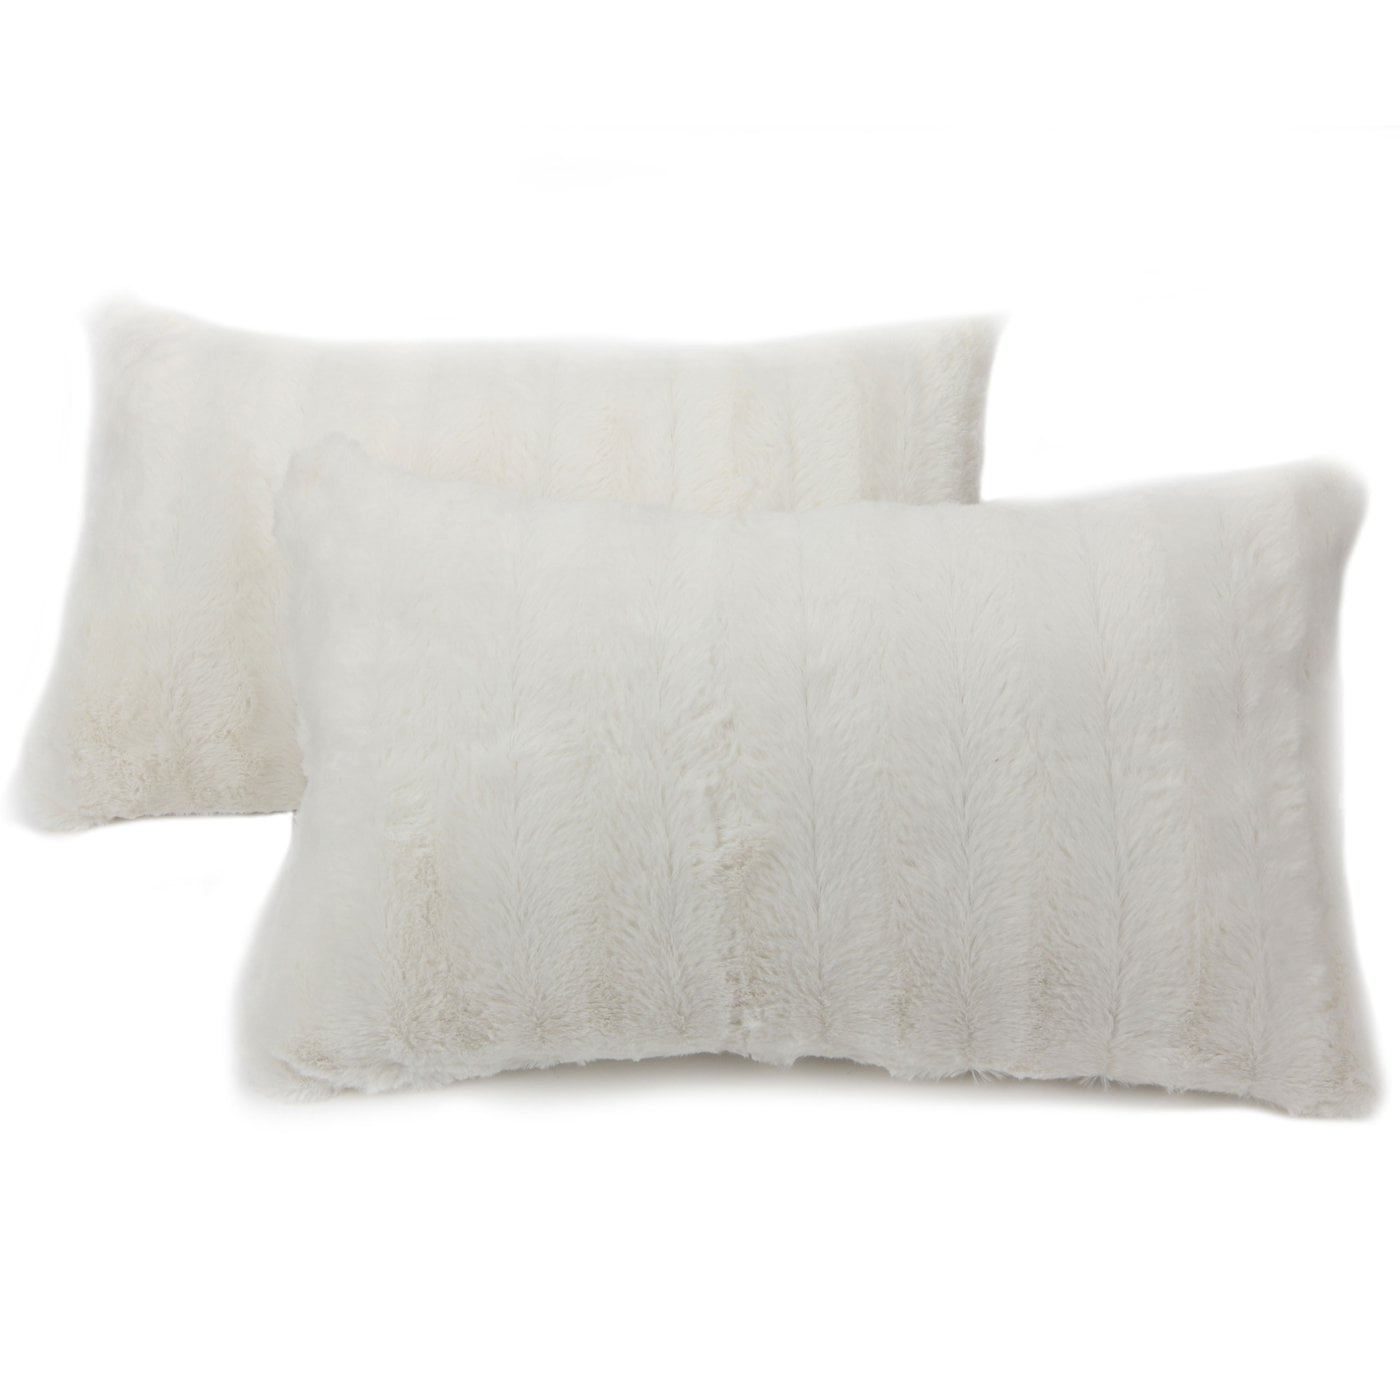 Cheer Collection Set of 2 Decorative White Square Accent Throw Pillows and  Insert for Couch Sofa Bed, Includes Zippered Cover 